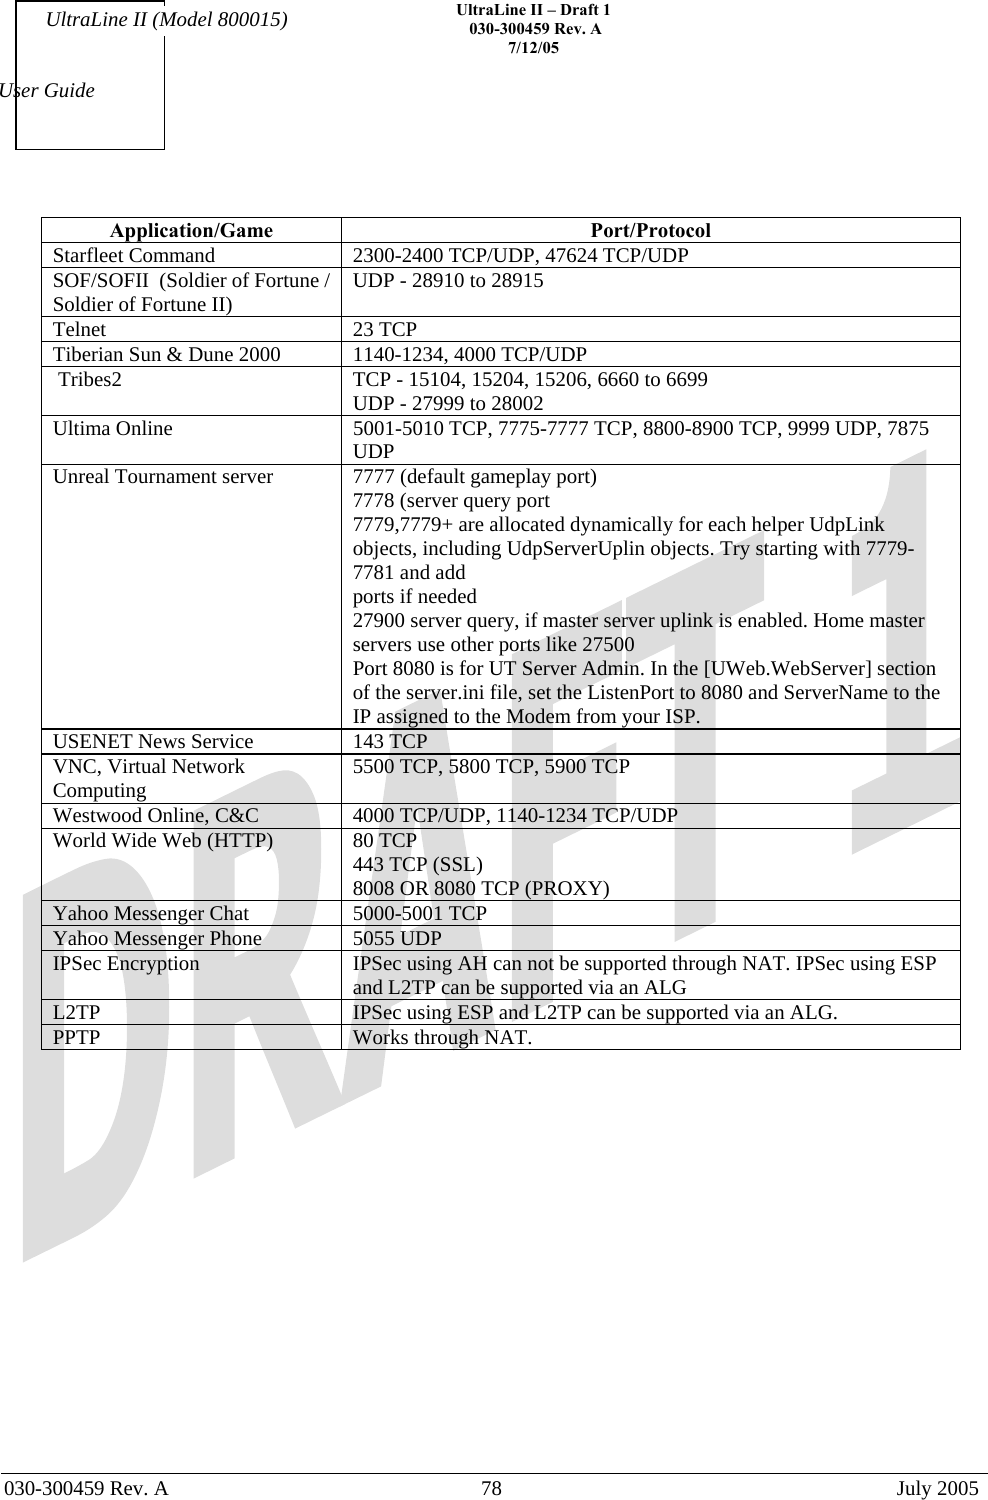    UltraLine II – Draft 1   030-300459 Rev. A 7/12/05   030-300459 Rev. A  78  July 2005  User Guide UltraLine II (Model 800015) Application/Game  Port/Protocol Starfleet Command  2300-2400 TCP/UDP, 47624 TCP/UDP SOF/SOFII  (Soldier of Fortune / Soldier of Fortune II)  UDP - 28910 to 28915 Telnet 23 TCP Tiberian Sun &amp; Dune 2000  1140-1234, 4000 TCP/UDP  Tribes2  TCP - 15104, 15204, 15206, 6660 to 6699 UDP - 27999 to 28002 Ultima Online  5001-5010 TCP, 7775-7777 TCP, 8800-8900 TCP, 9999 UDP, 7875 UDP Unreal Tournament server  7777 (default gameplay port) 7778 (server query port 7779,7779+ are allocated dynamically for each helper UdpLink objects, including UdpServerUplin objects. Try starting with 7779-7781 and add ports if needed 27900 server query, if master server uplink is enabled. Home master servers use other ports like 27500 Port 8080 is for UT Server Admin. In the [UWeb.WebServer] section of the server.ini file, set the ListenPort to 8080 and ServerName to the IP assigned to the Modem from your ISP. USENET News Service  143 TCP VNC, Virtual Network Computing  5500 TCP, 5800 TCP, 5900 TCP Westwood Online, C&amp;C  4000 TCP/UDP, 1140-1234 TCP/UDP World Wide Web (HTTP)  80 TCP 443 TCP (SSL) 8008 OR 8080 TCP (PROXY) Yahoo Messenger Chat  5000-5001 TCP Yahoo Messenger Phone  5055 UDP IPSec Encryption  IPSec using AH can not be supported through NAT. IPSec using ESP and L2TP can be supported via an ALG L2TP  IPSec using ESP and L2TP can be supported via an ALG. PPTP  Works through NAT.      